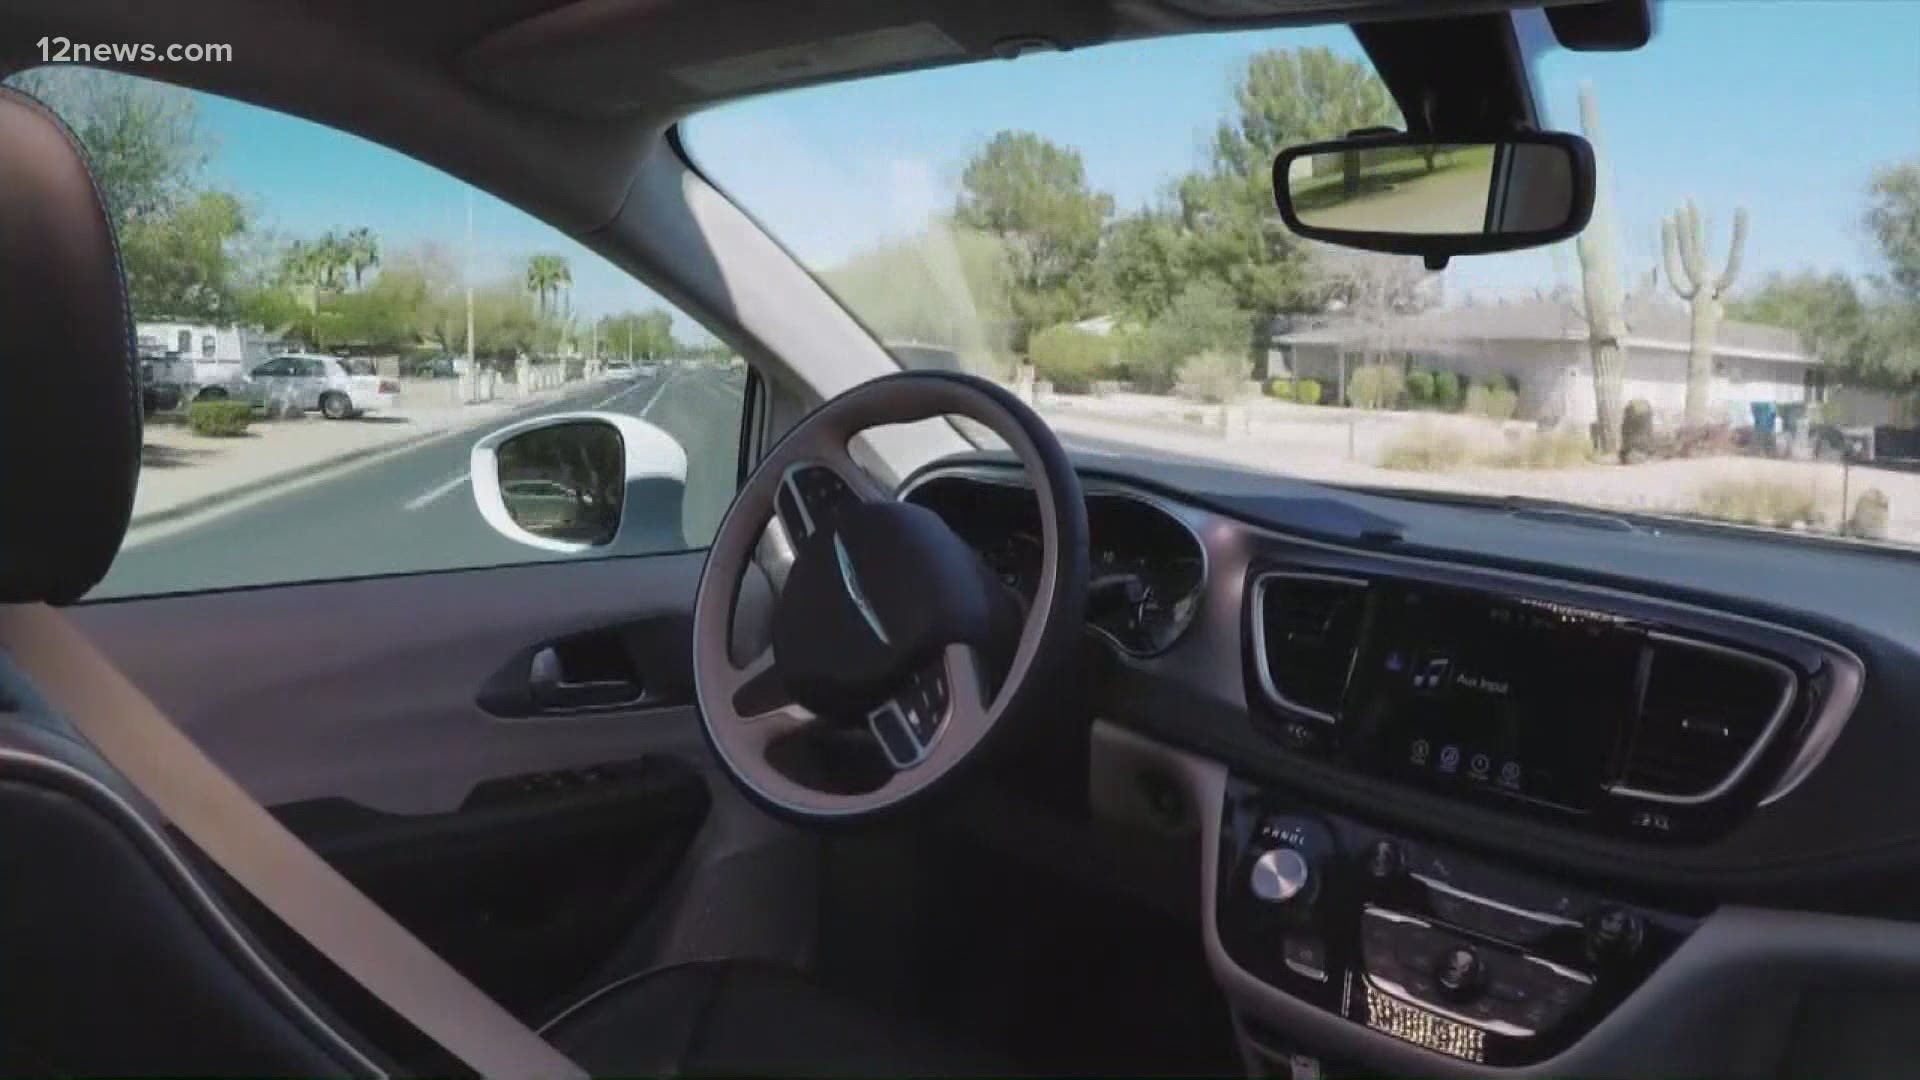 Driverless technology is entering a new phase in the Valley. Next time you use a Waymo vehicle you'll have a hard time finding someone behind the wheel.